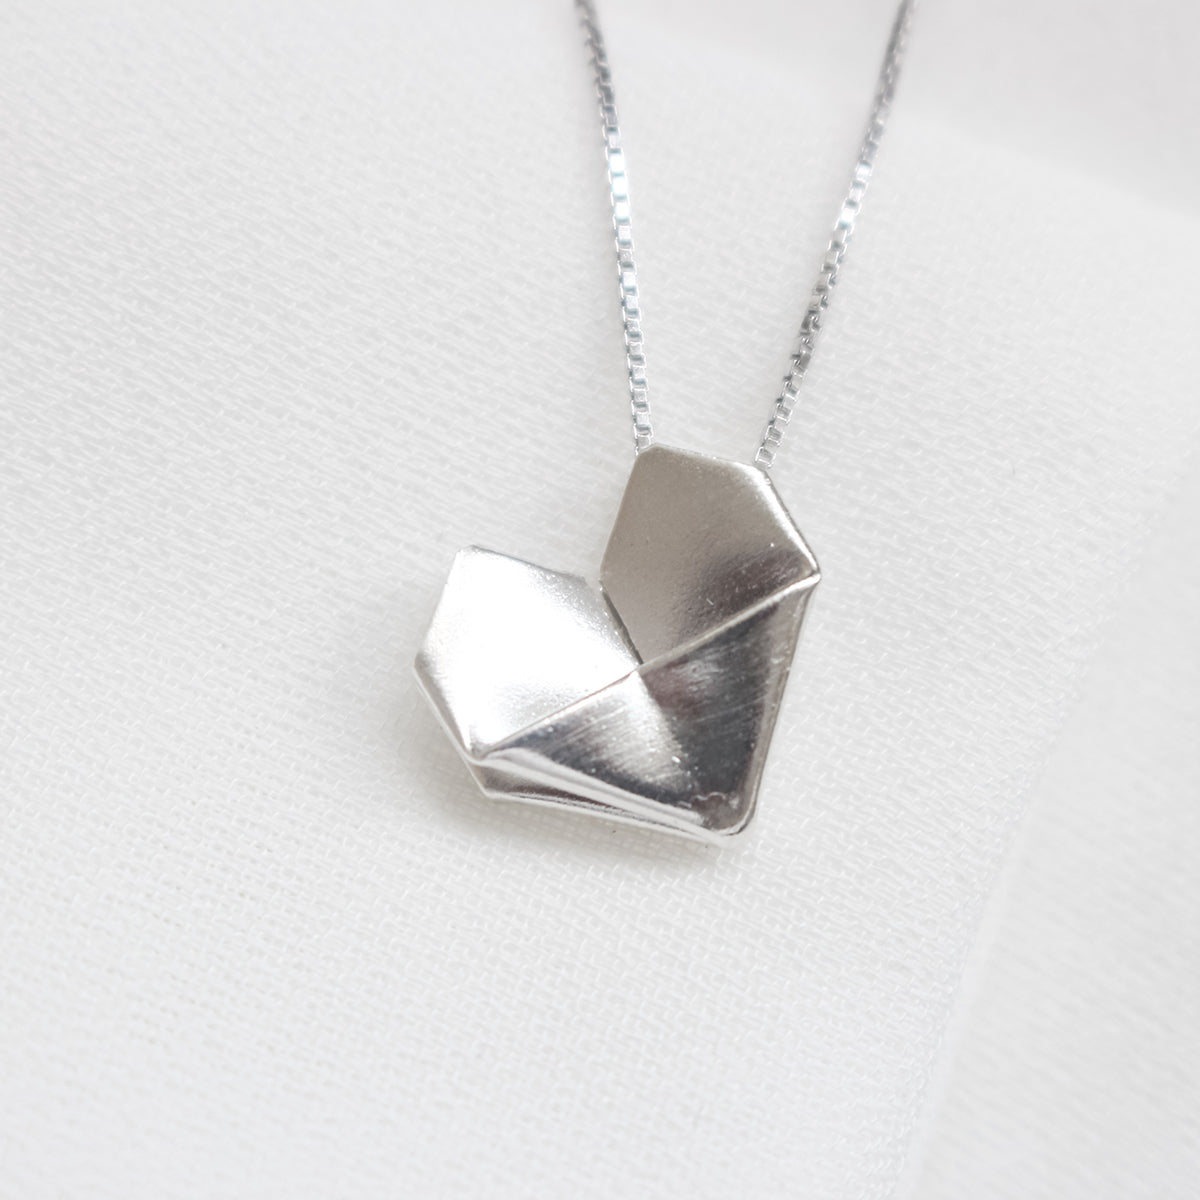 Origami Silver Heart Necklace / Sterling Silver Paper Heart Necklace / Folding Heart Necklace